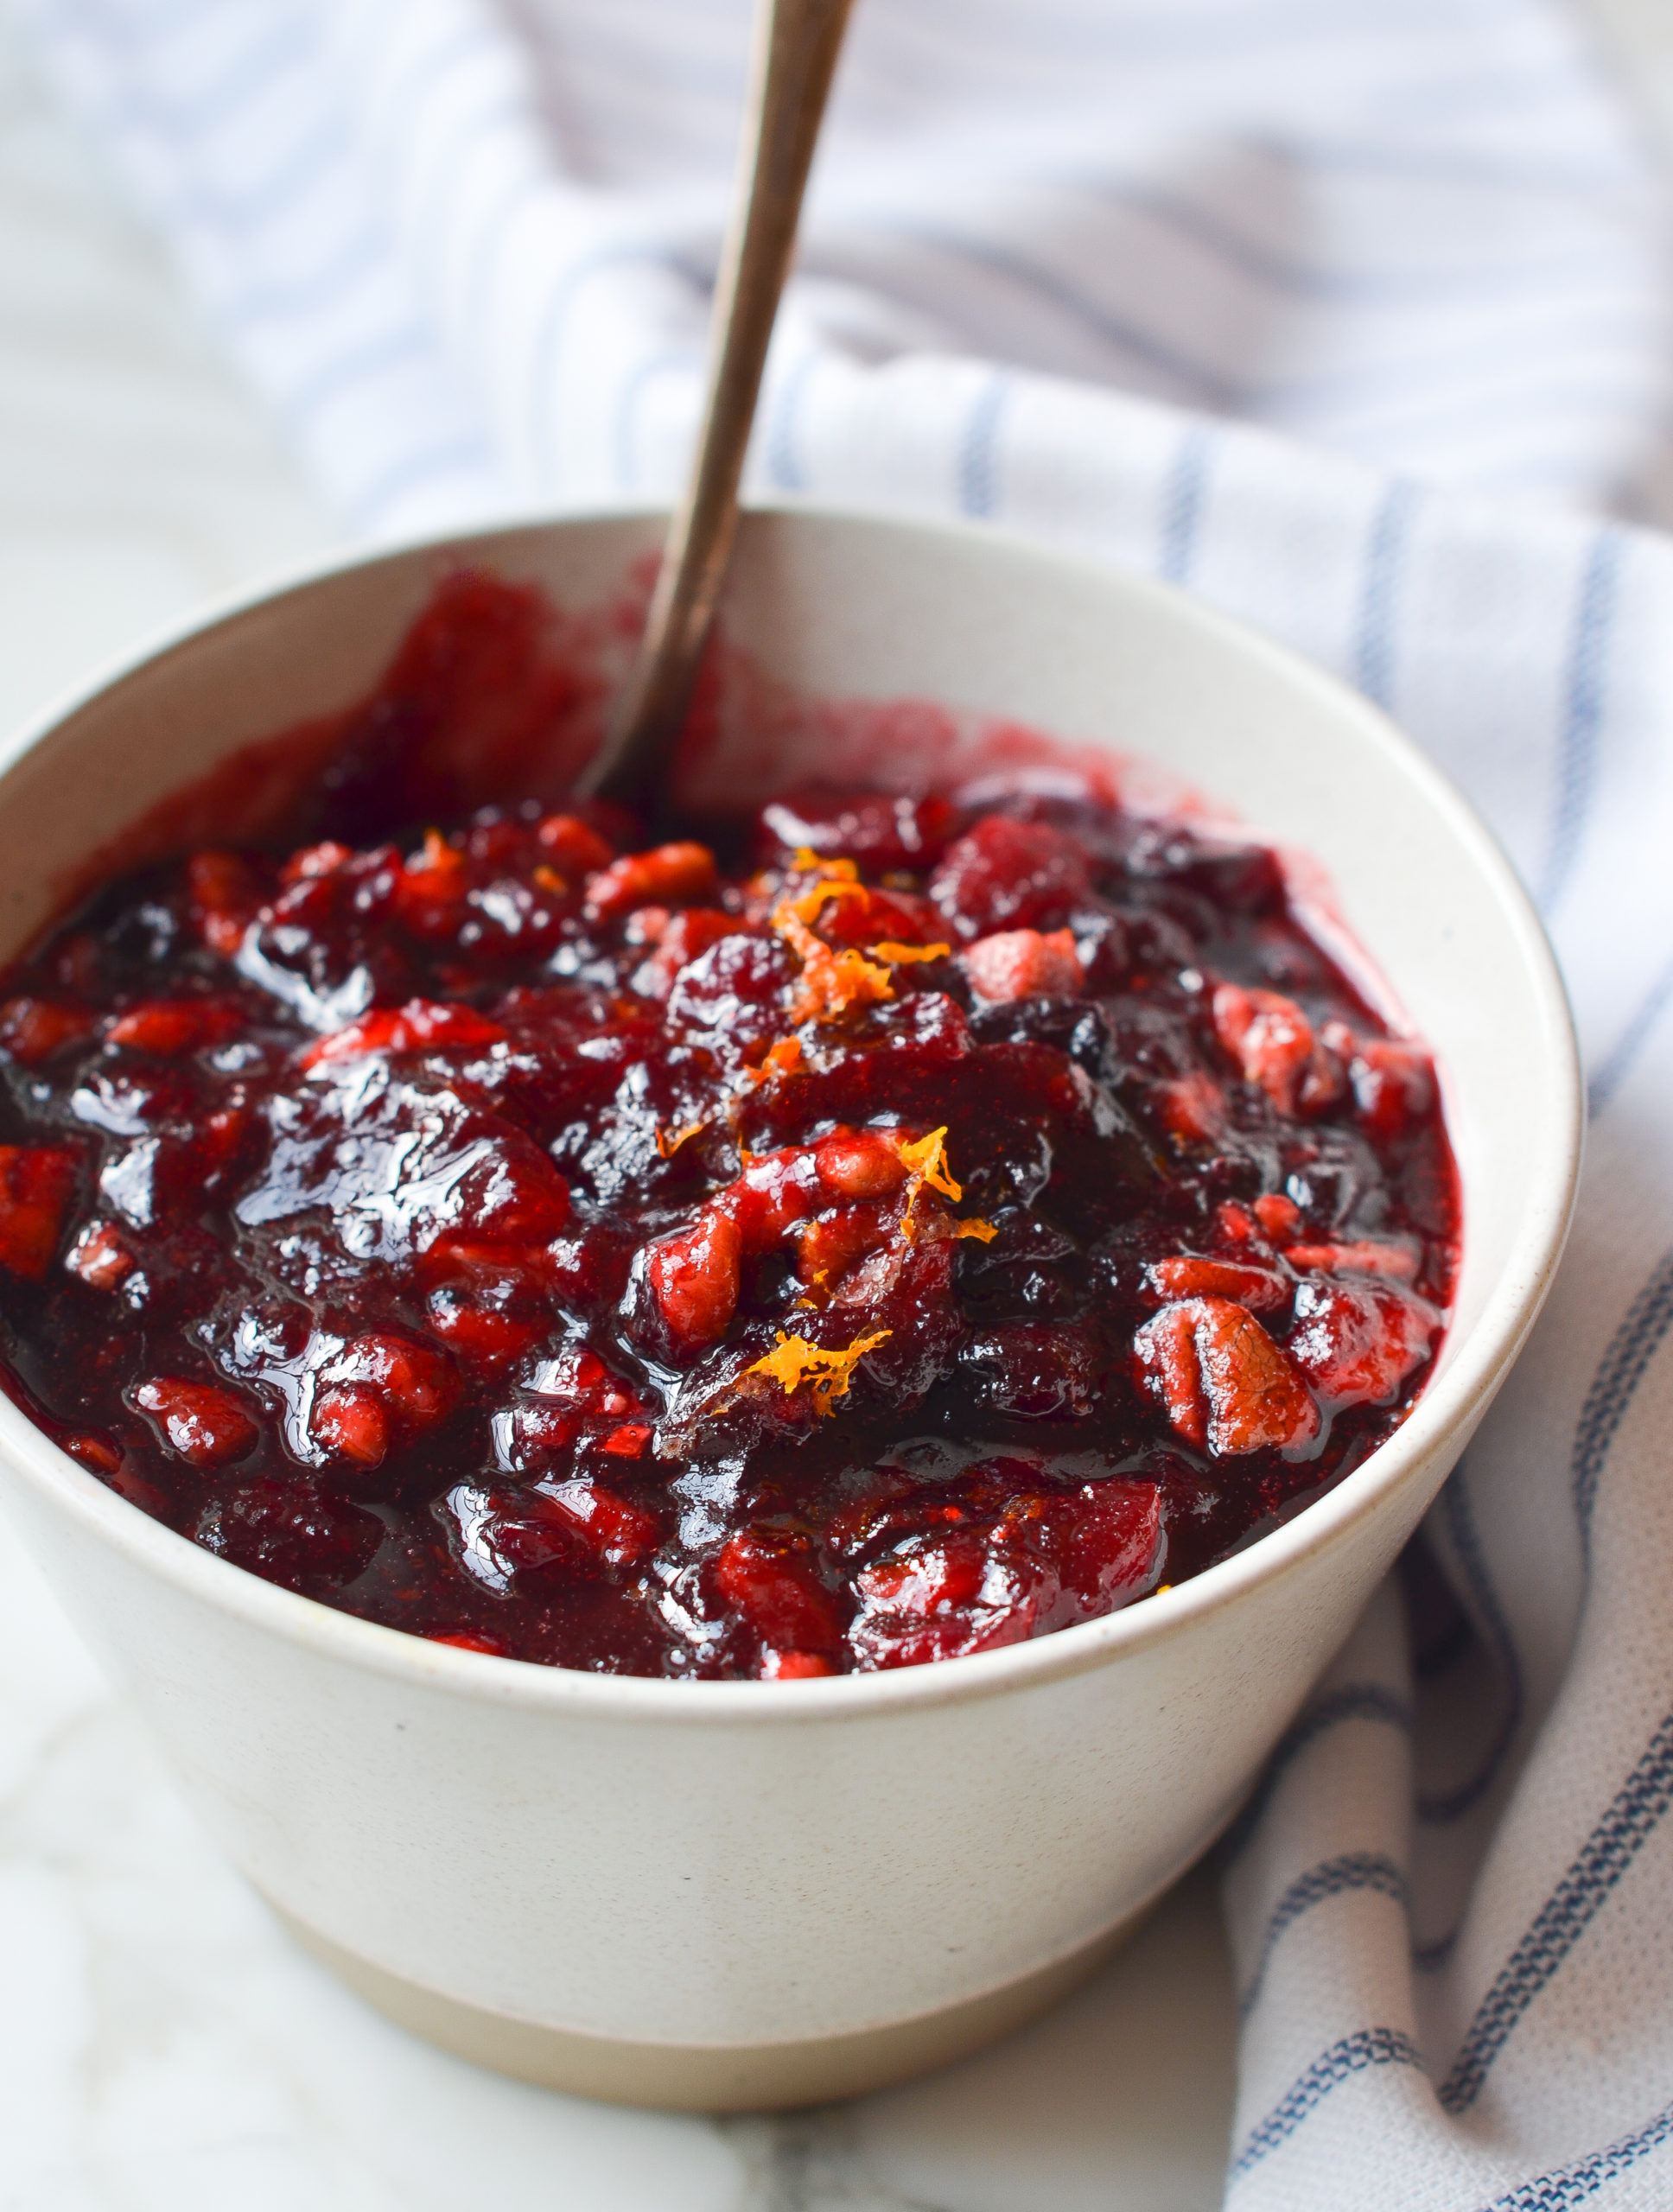 Cranberry Walnut Relish Recipe : Almost Famous Cranberry Walnut Relish ...